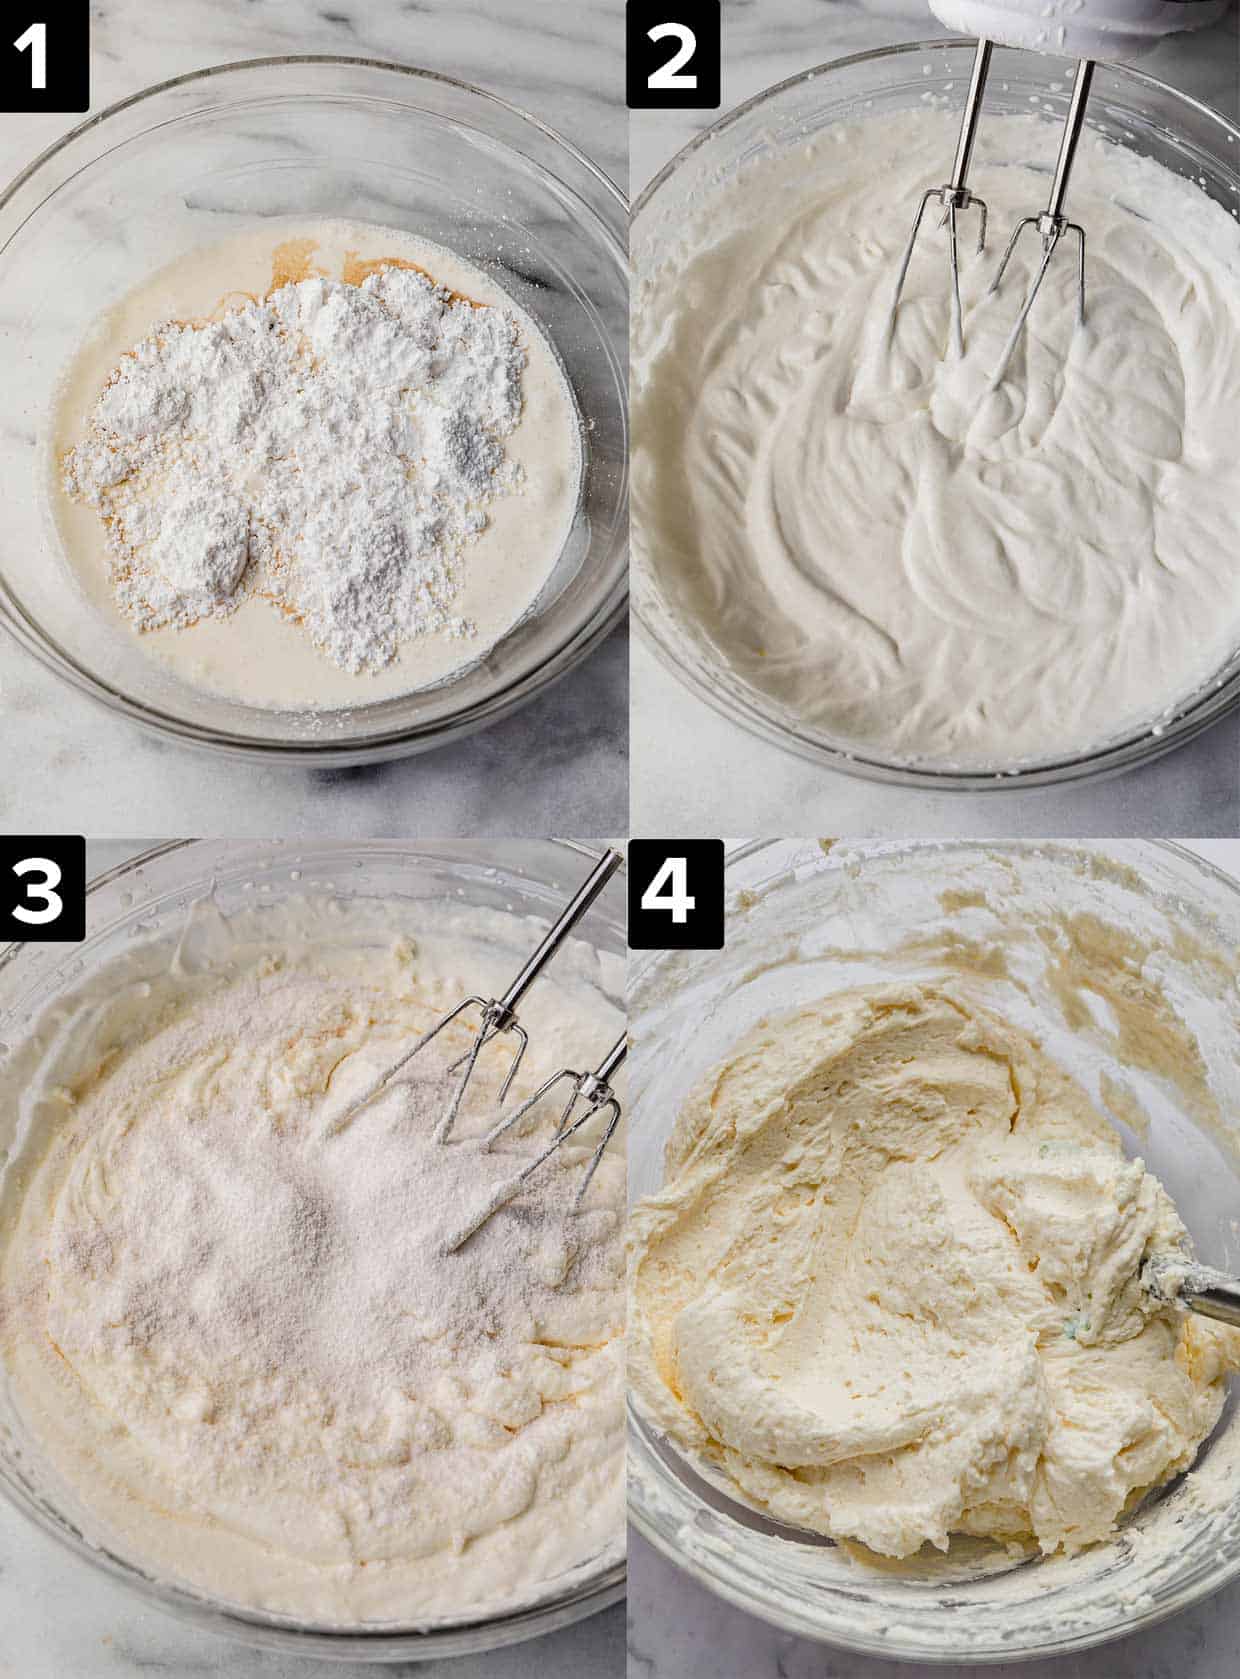 Four photos showing how to make Whipped Cream Frosting: a glass bowl on a white background with heavy cream and powdered sugar in it, then the process of whipping it and adding powdered instant pudding.